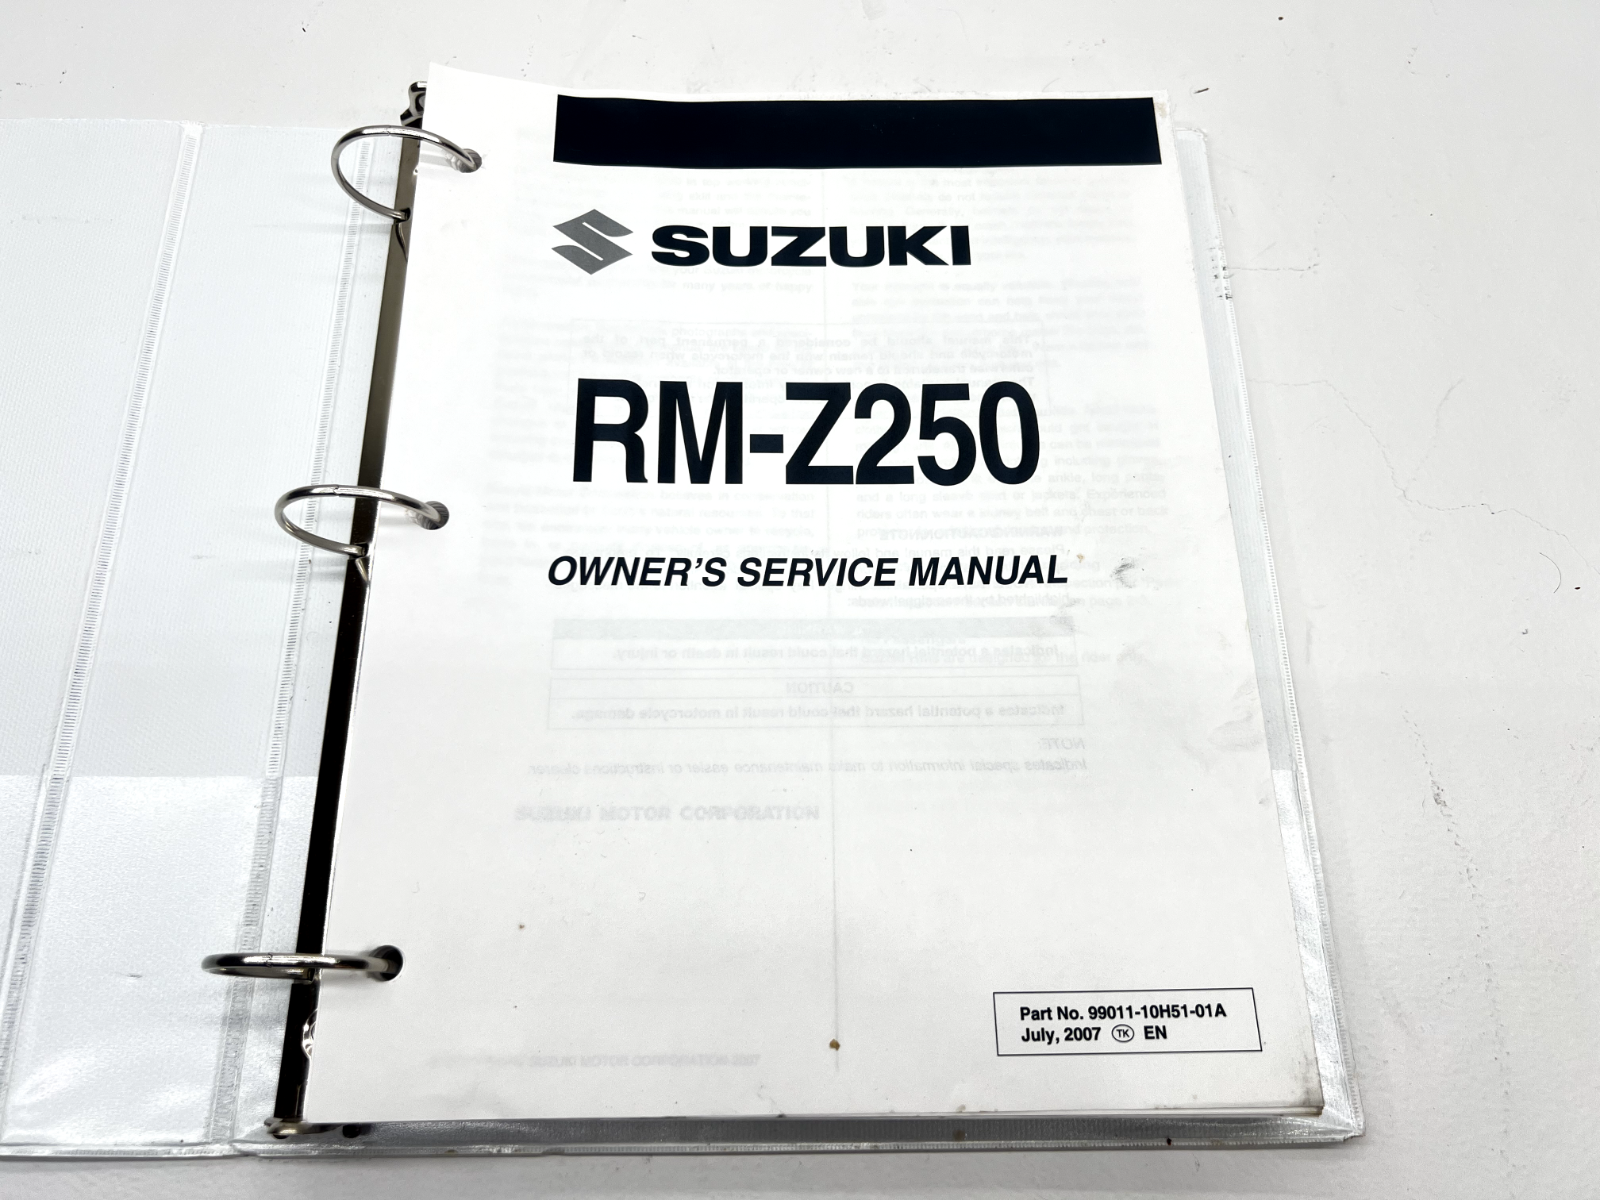 2007 Suzuki RMZ250 Owners Service Manual Book Reference maintenance guide